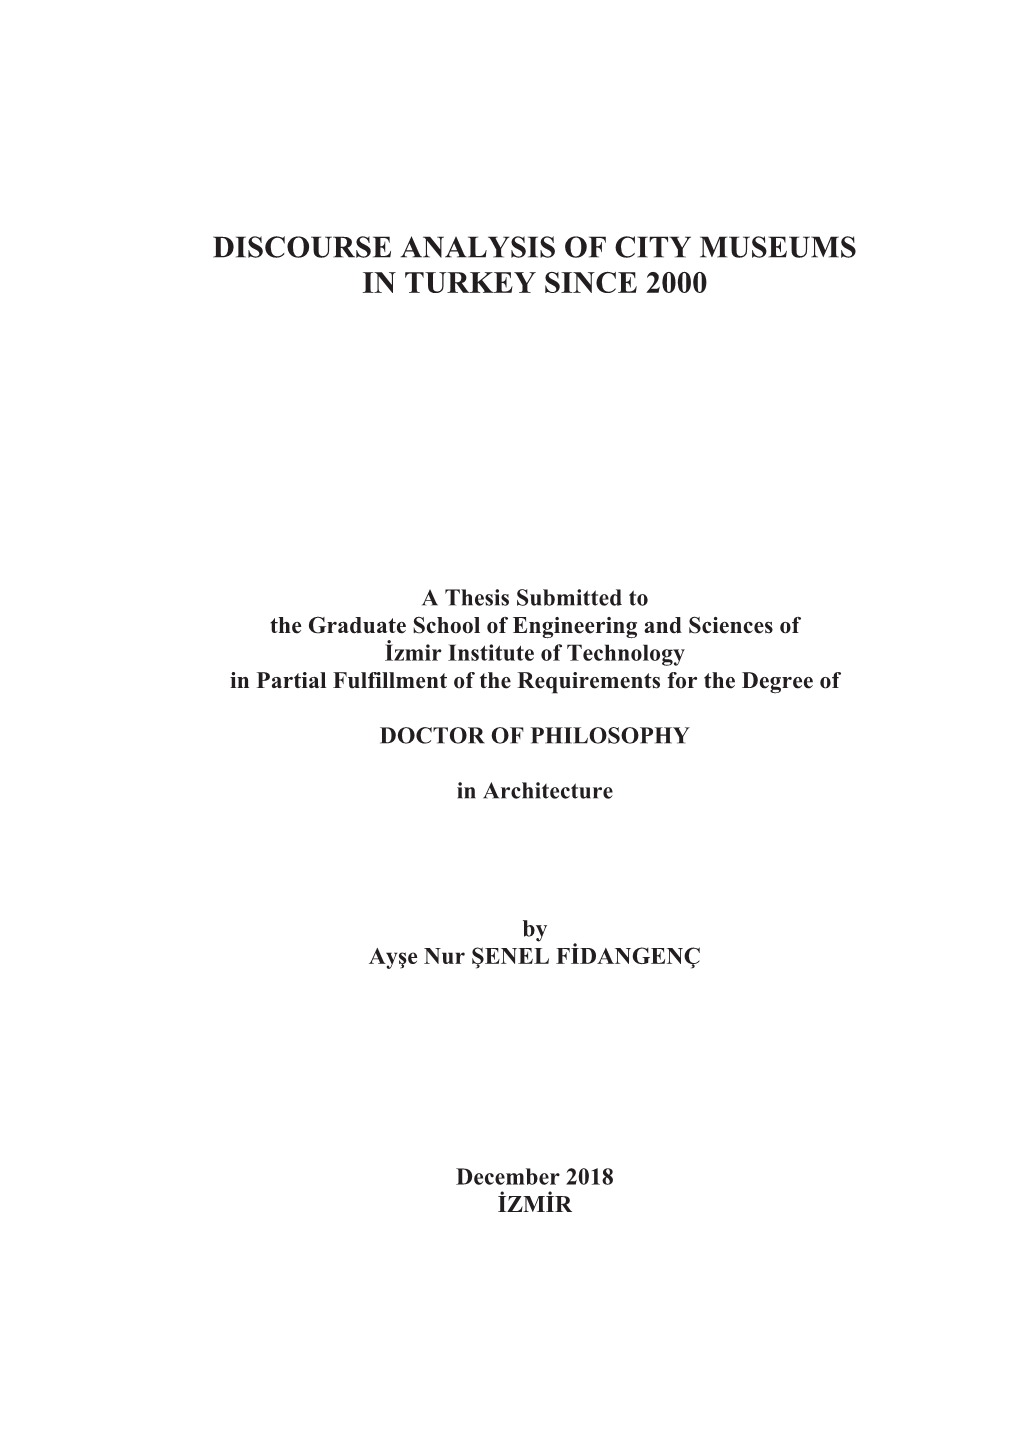 Discourse Analysis of City Museums in Turkey Since 2000